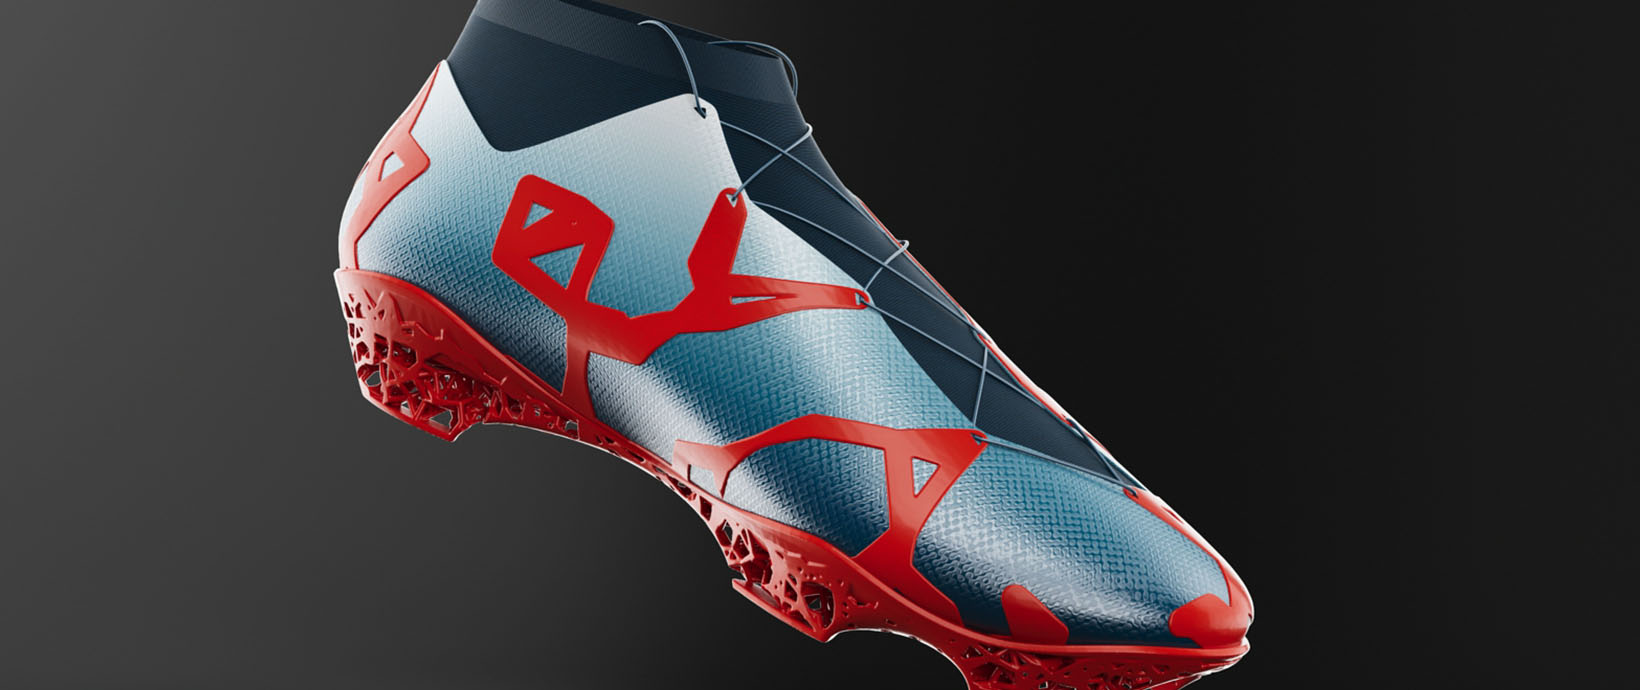 Exploring Modern Soccer Cleat Design with Altair Sulis